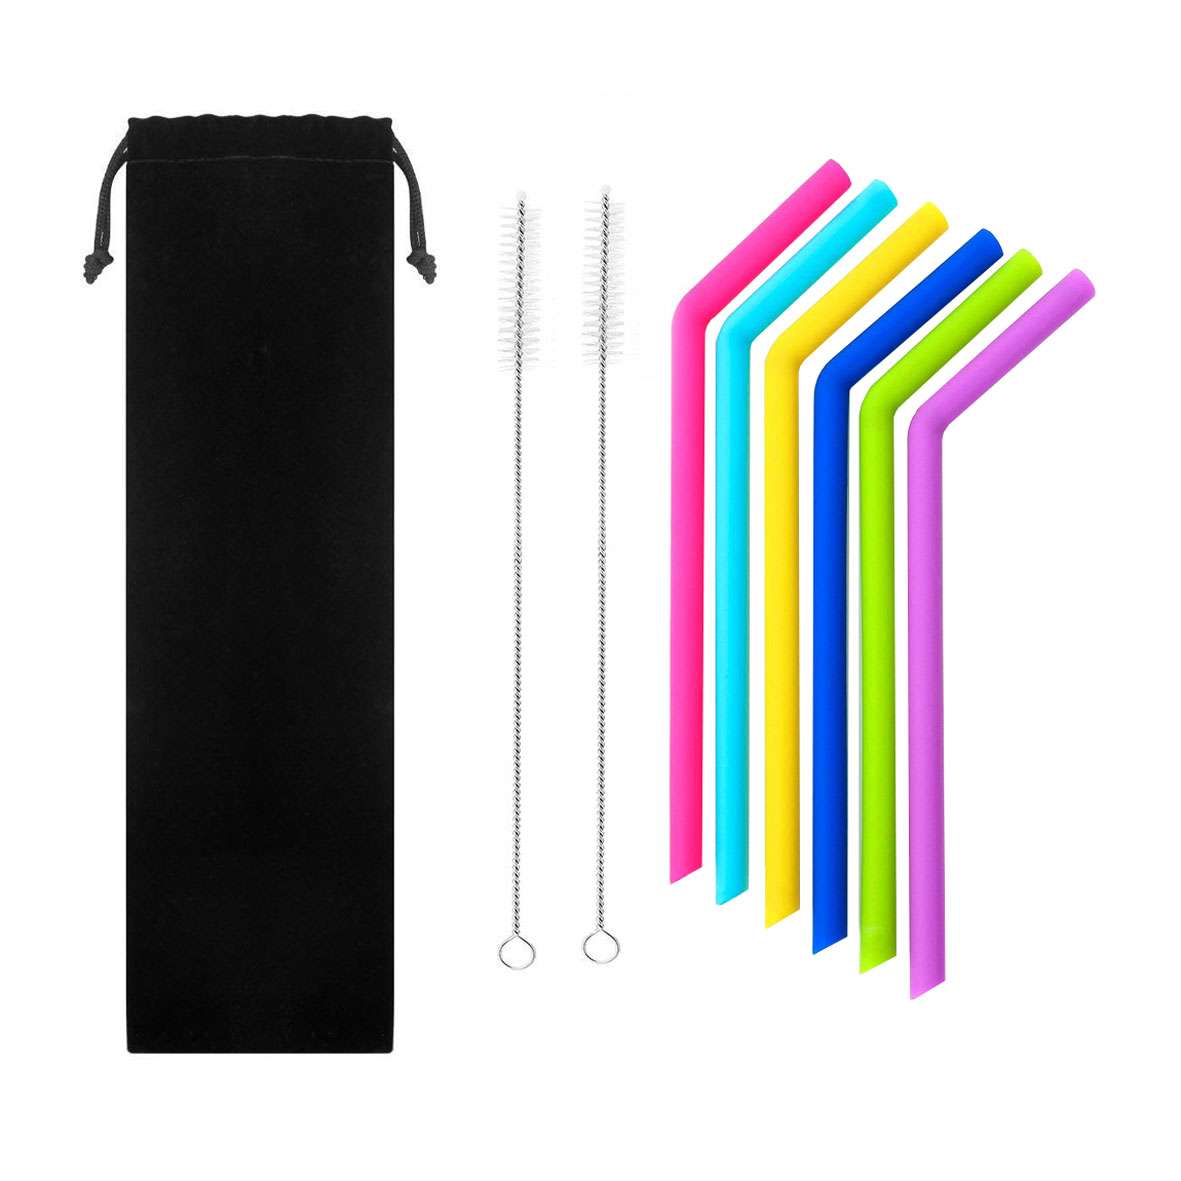 GL-AAJ1101 8 in 1 Silicone Drinking Bend Straw with Cleaning Brush